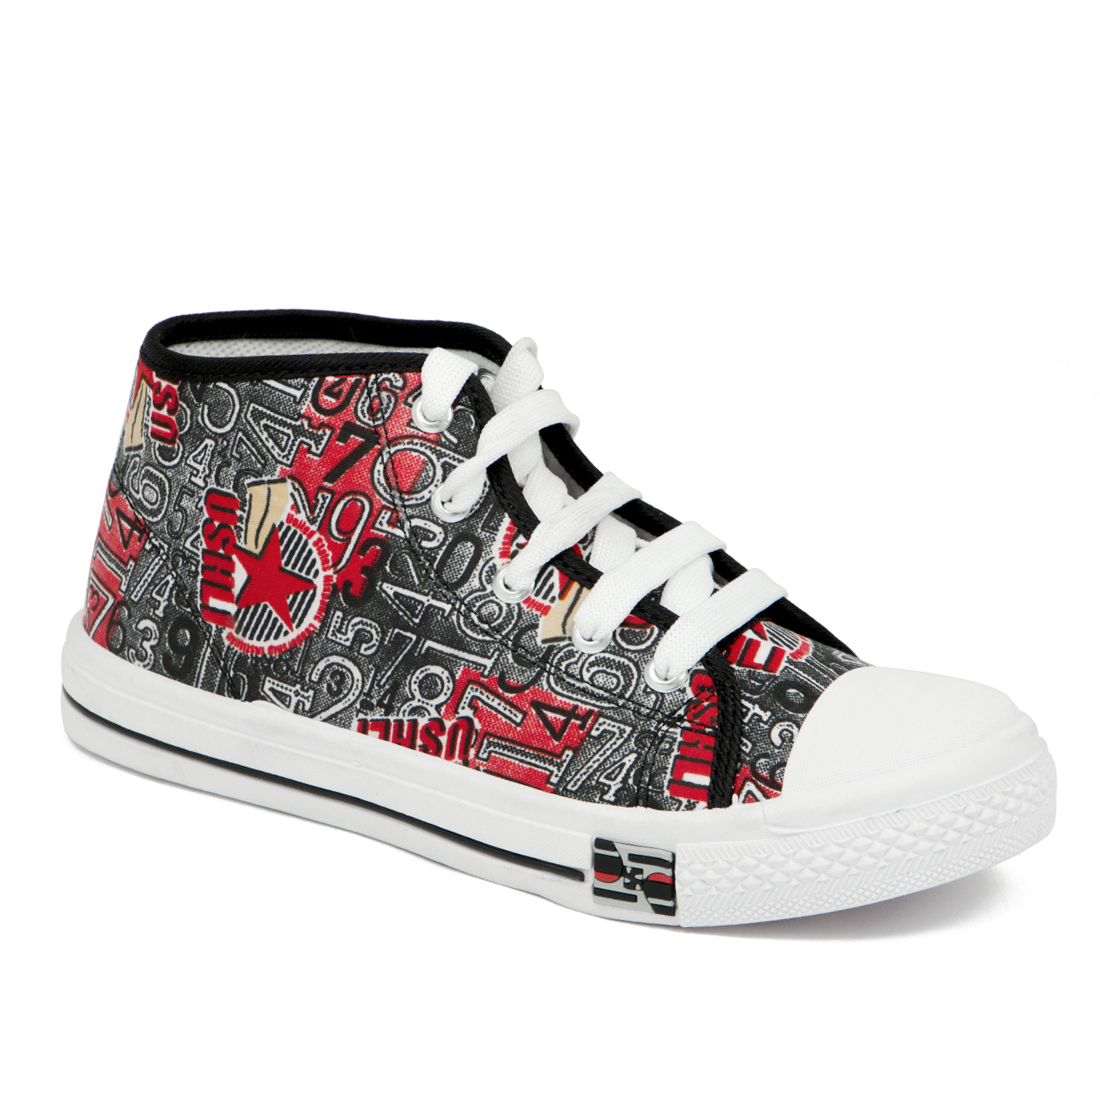 Buy Asian Women's Black & Red Sneakers Online @ ₹399 from ShopClues